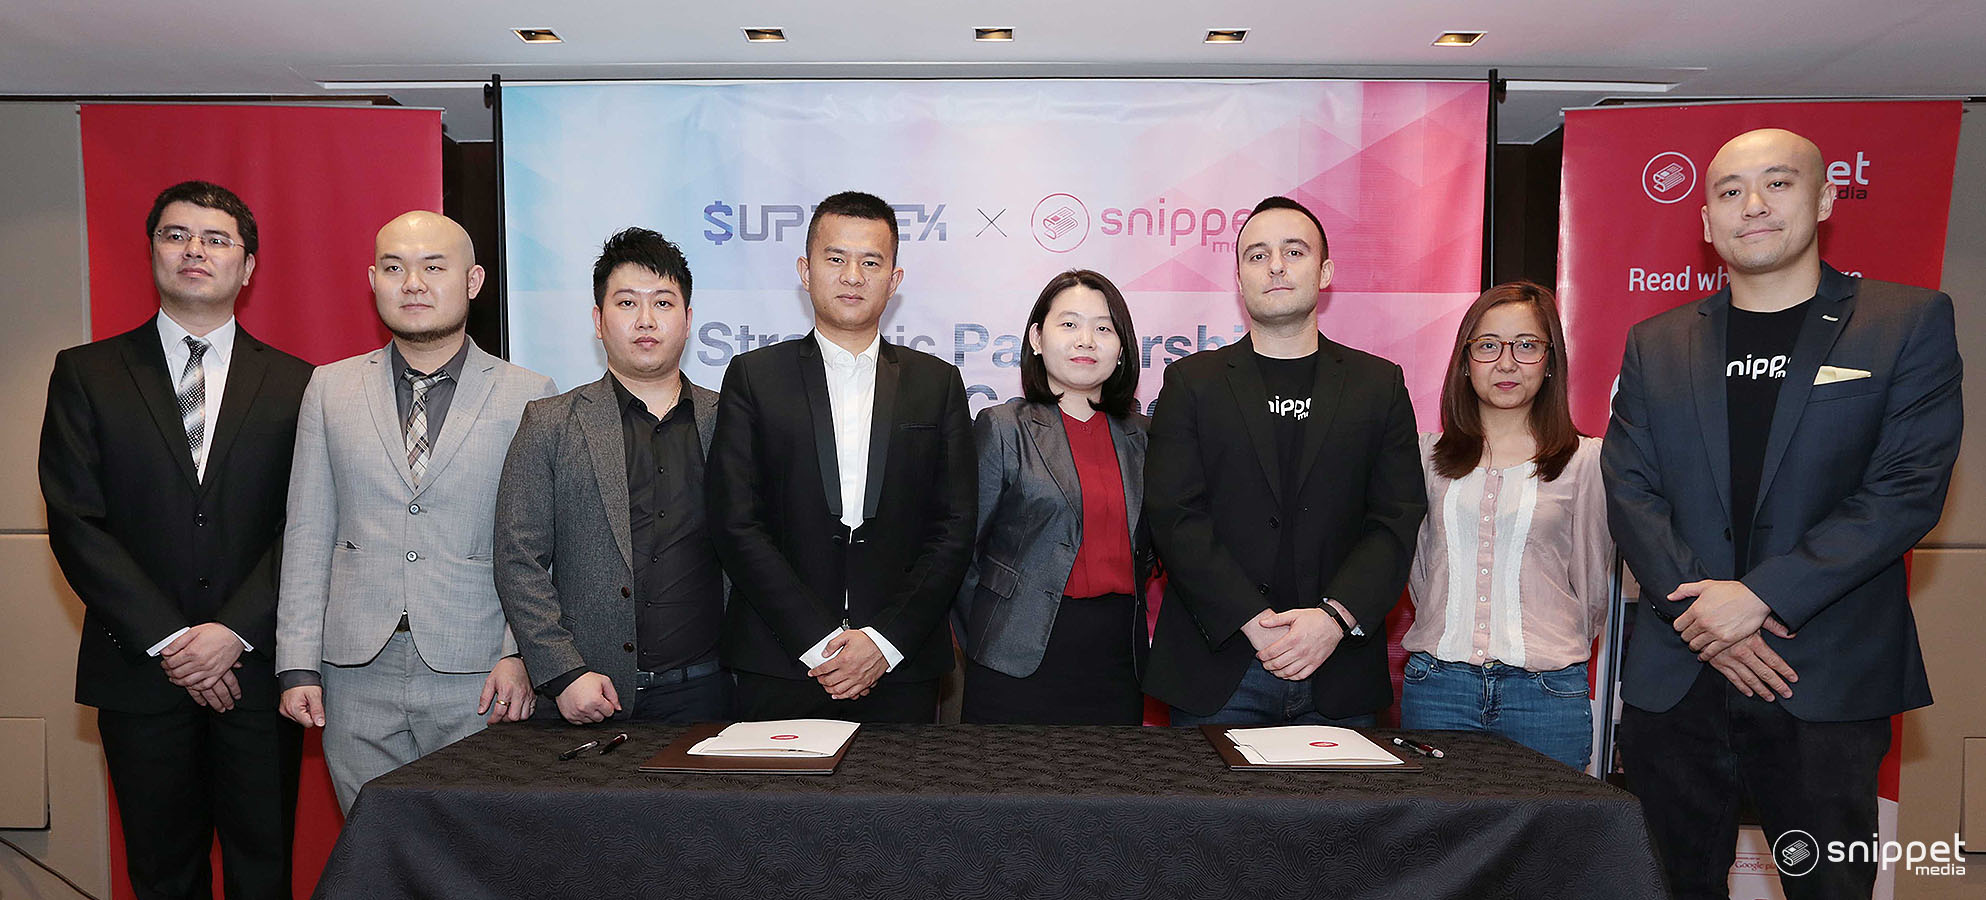 SnippetMEdia introduces blockchain technology in Philippine digital media landscape